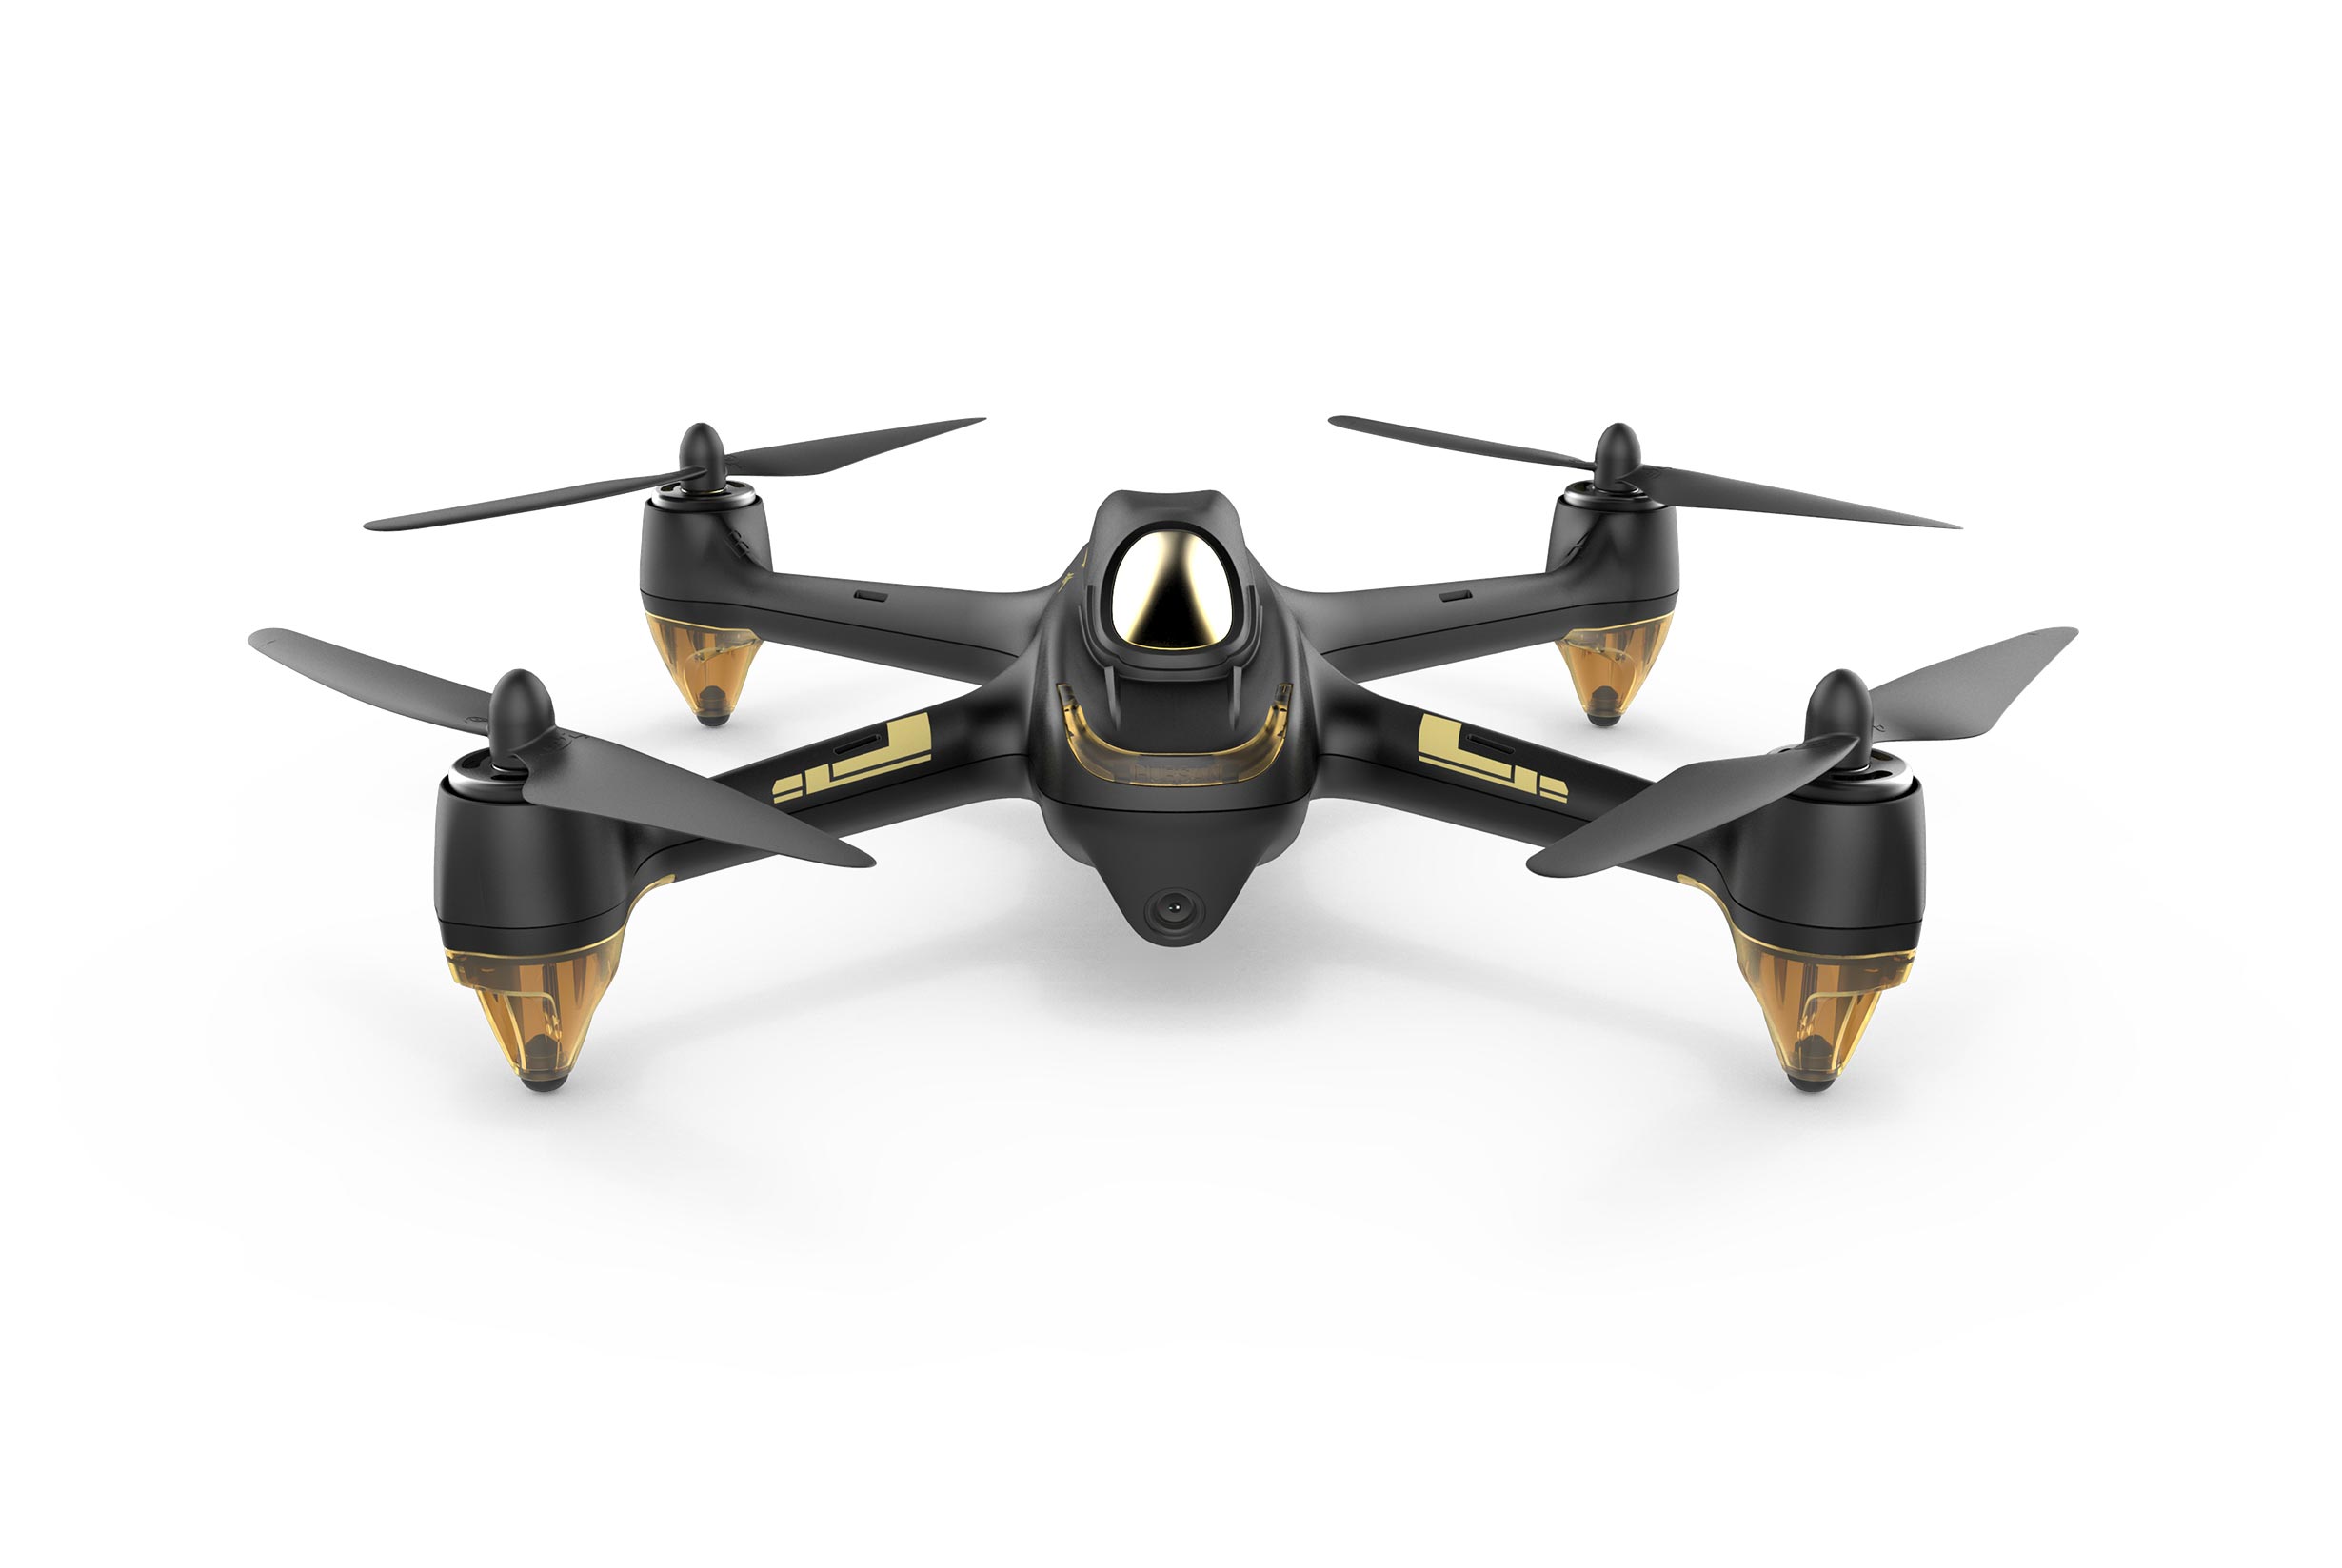 2019 Hubsan X4 H501S S Pro FPV Drone Brushless 1080P 6Axis GPS RTF 3 Batteries 